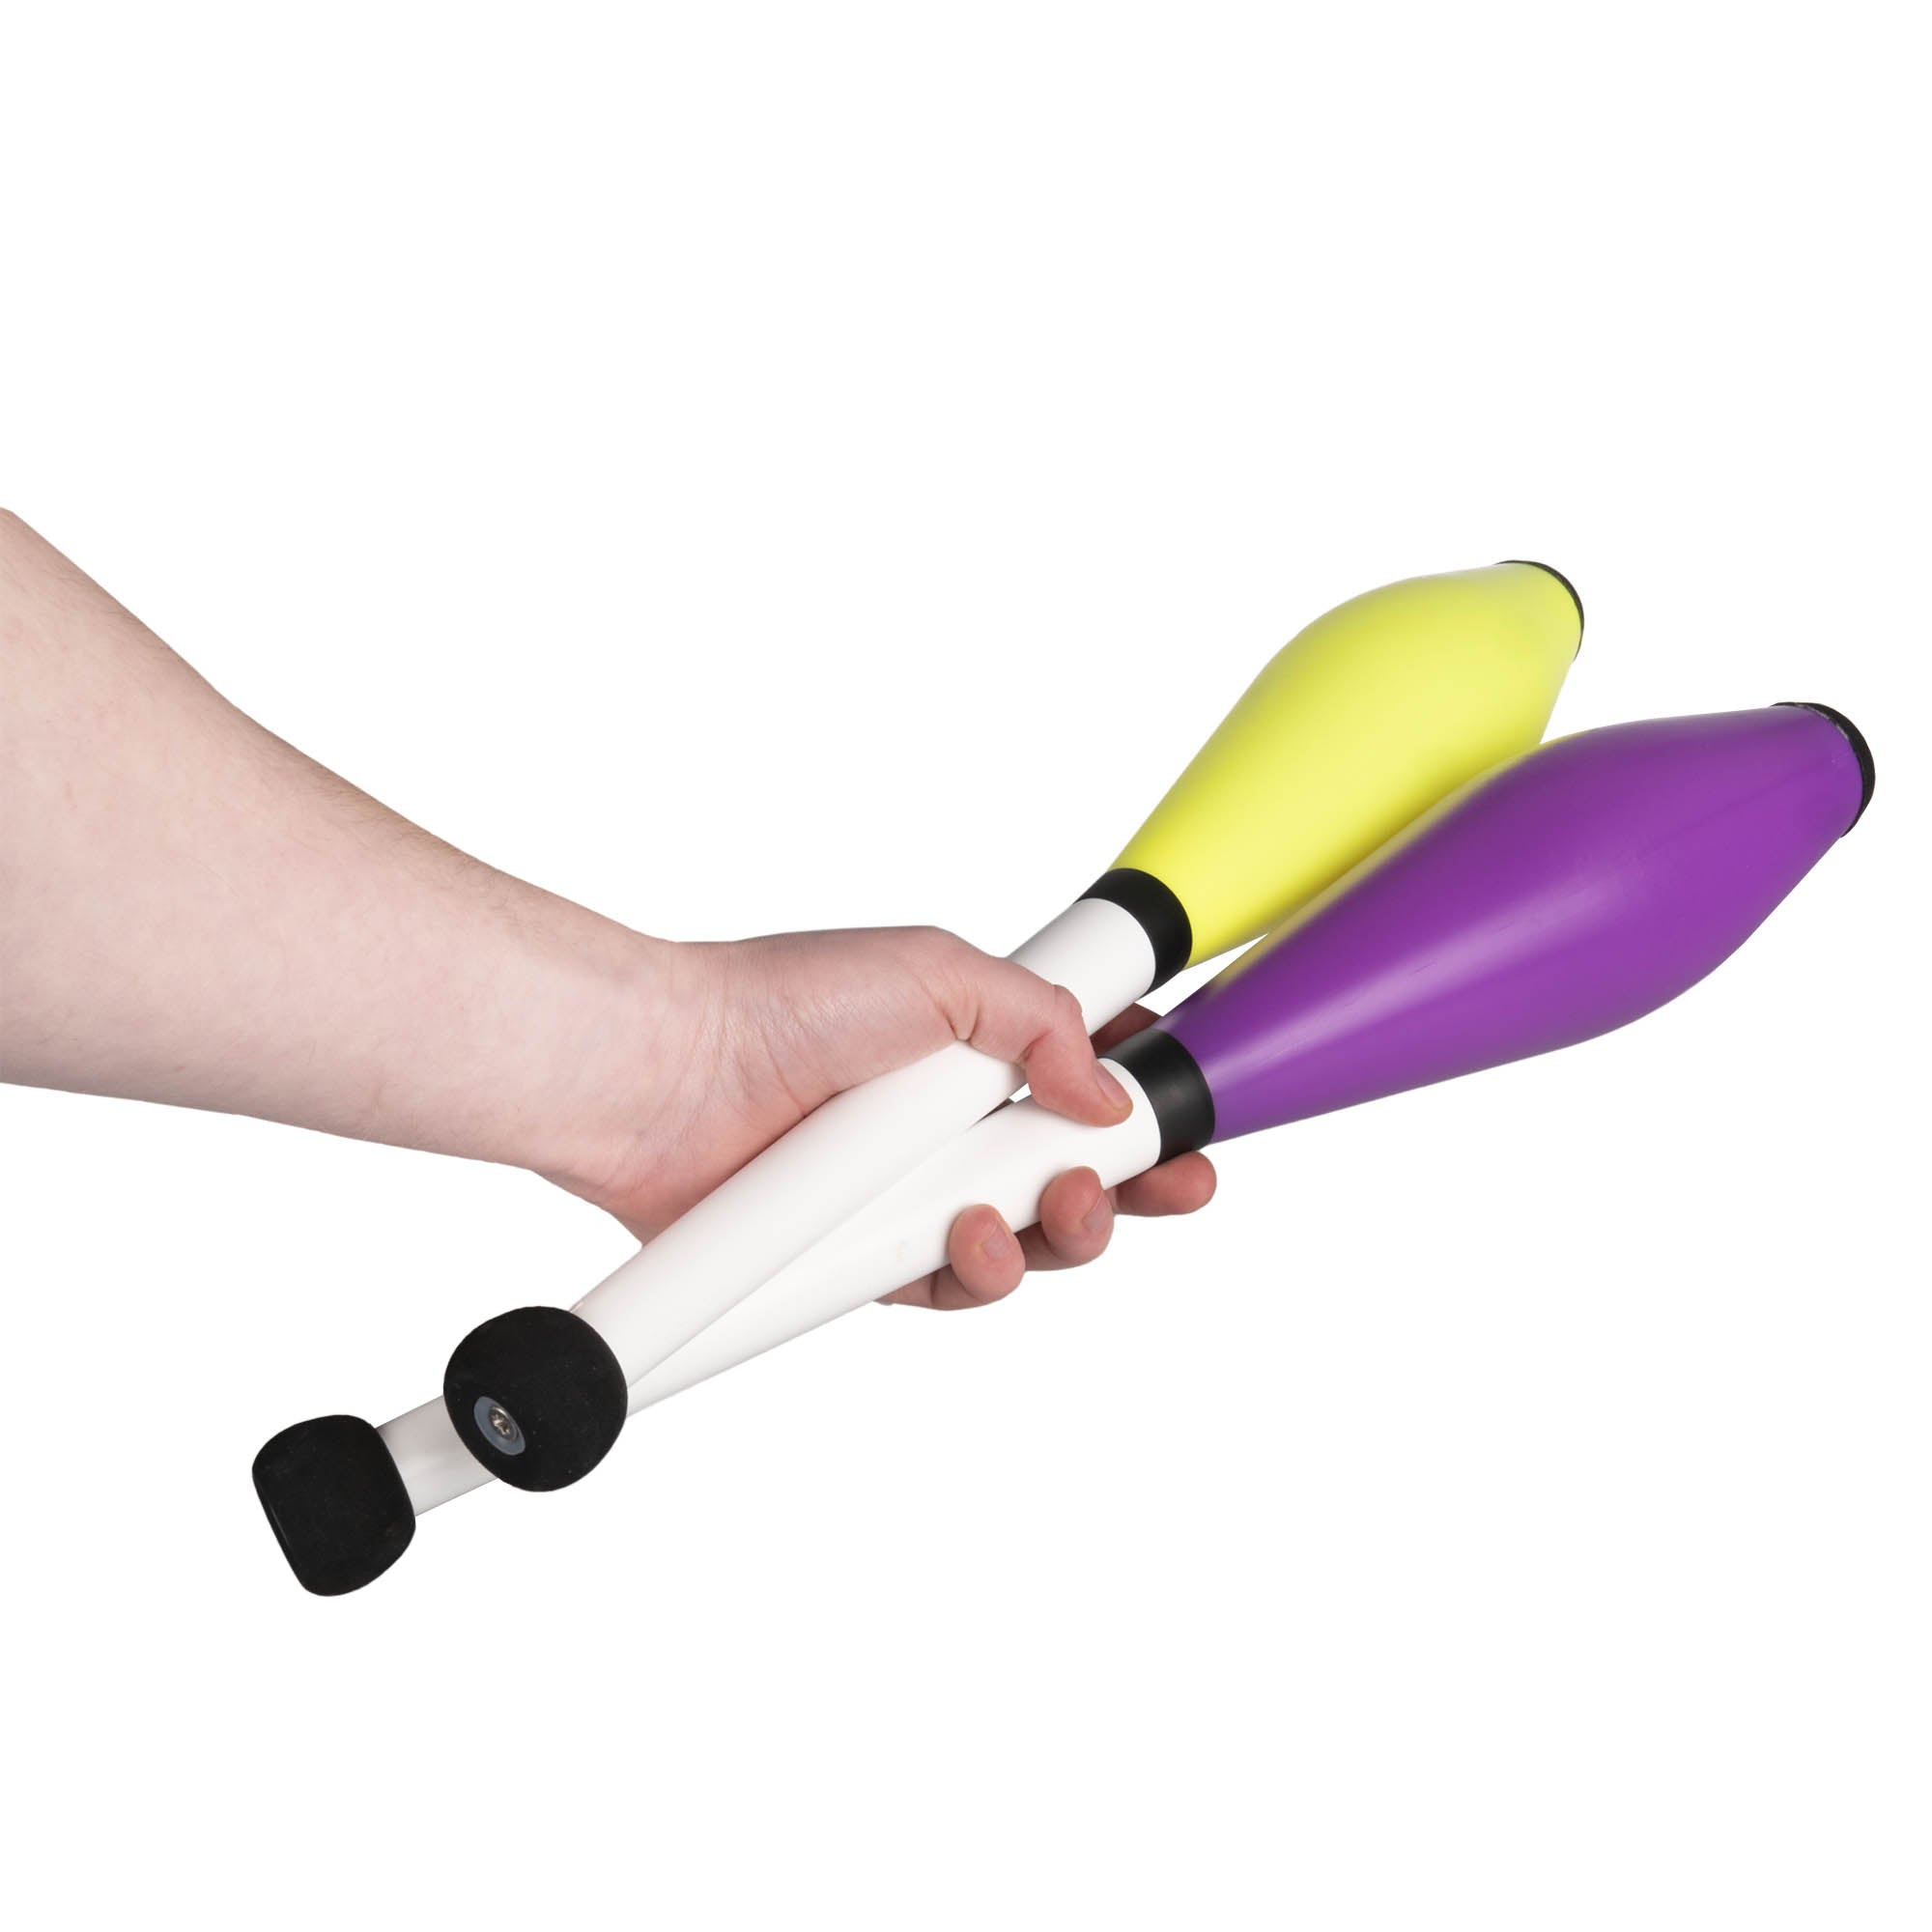 Yellow and purple delphin juggling club in hand